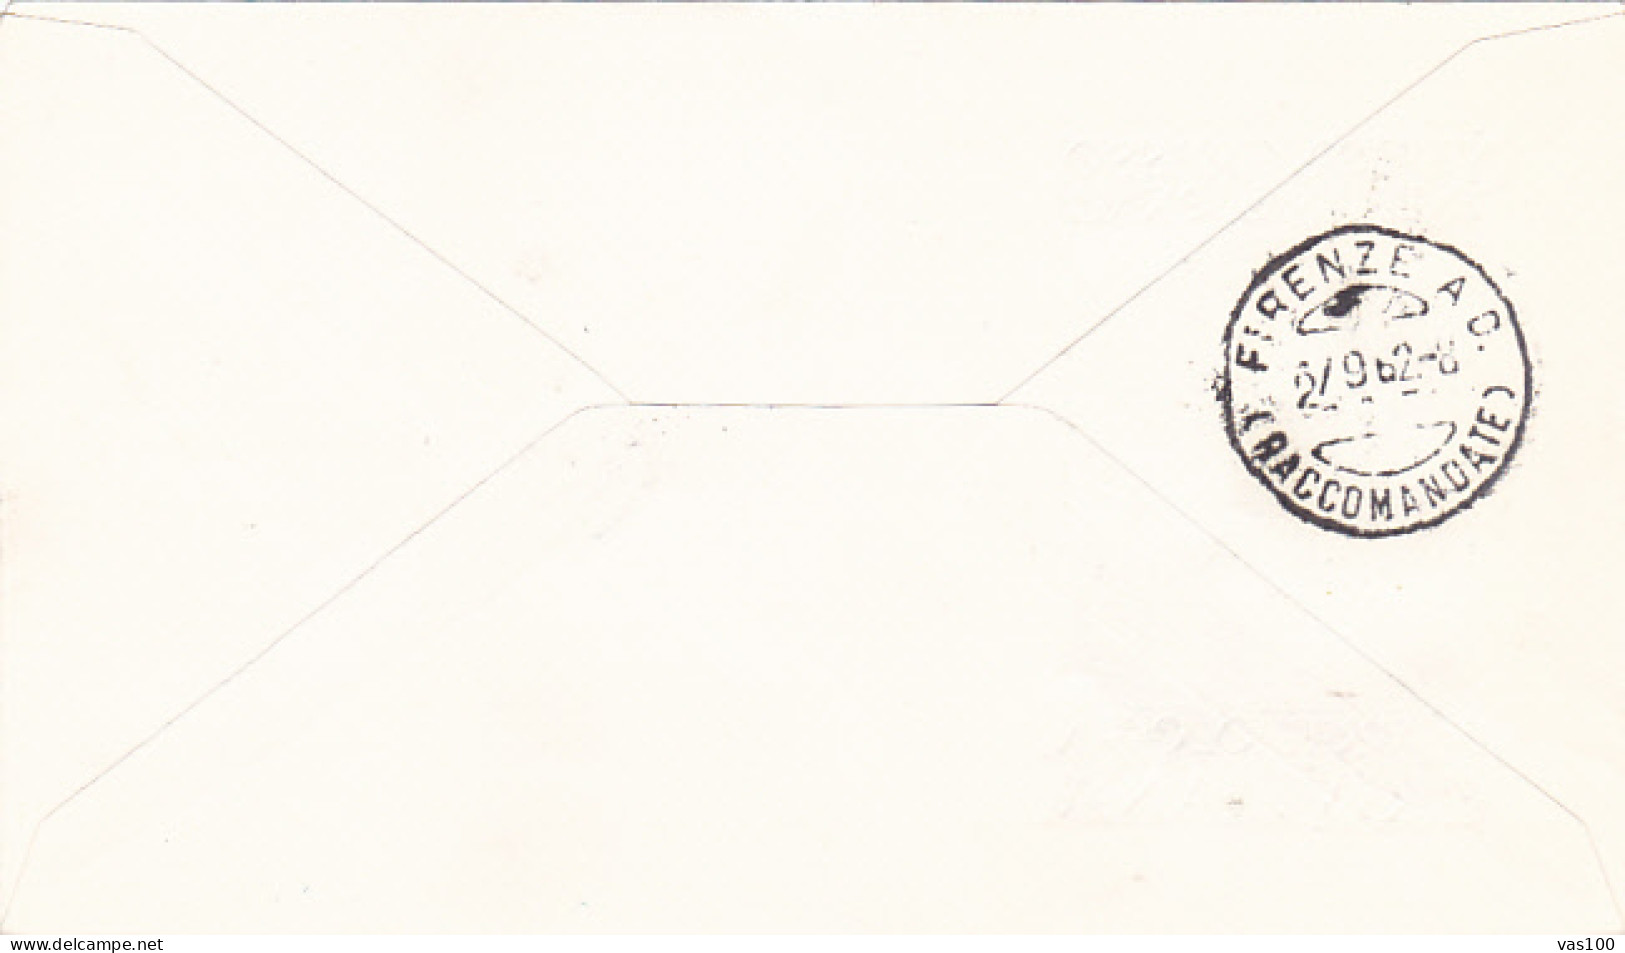 ARCHAEOLOGY, INTERNATIONA CONGRESS OF CHRISTIAN ARCHAEOLOGY, REGISTERED COVER FDC, 1962, VATICAN - Archéologie